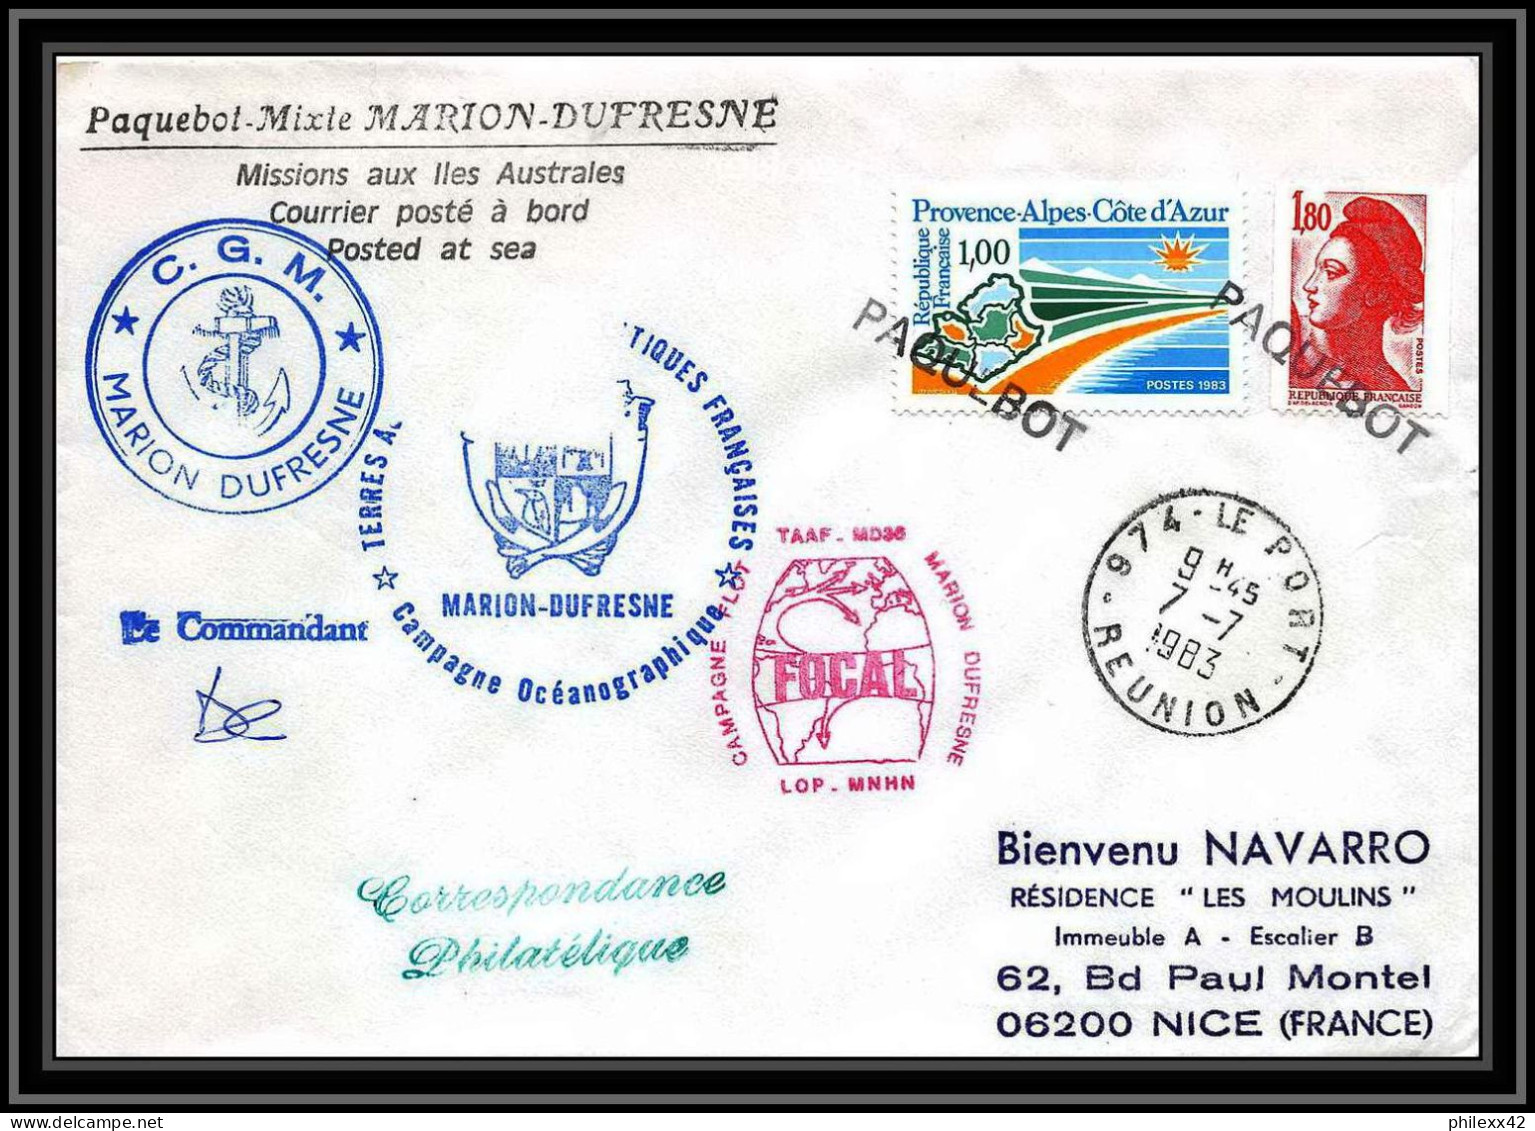 1381 Marion Dufresne Signé Signed 22/7/1983 Paquebot TAAF Antarctic Terres Australes Lettre (cover) - Antarktis-Expeditionen